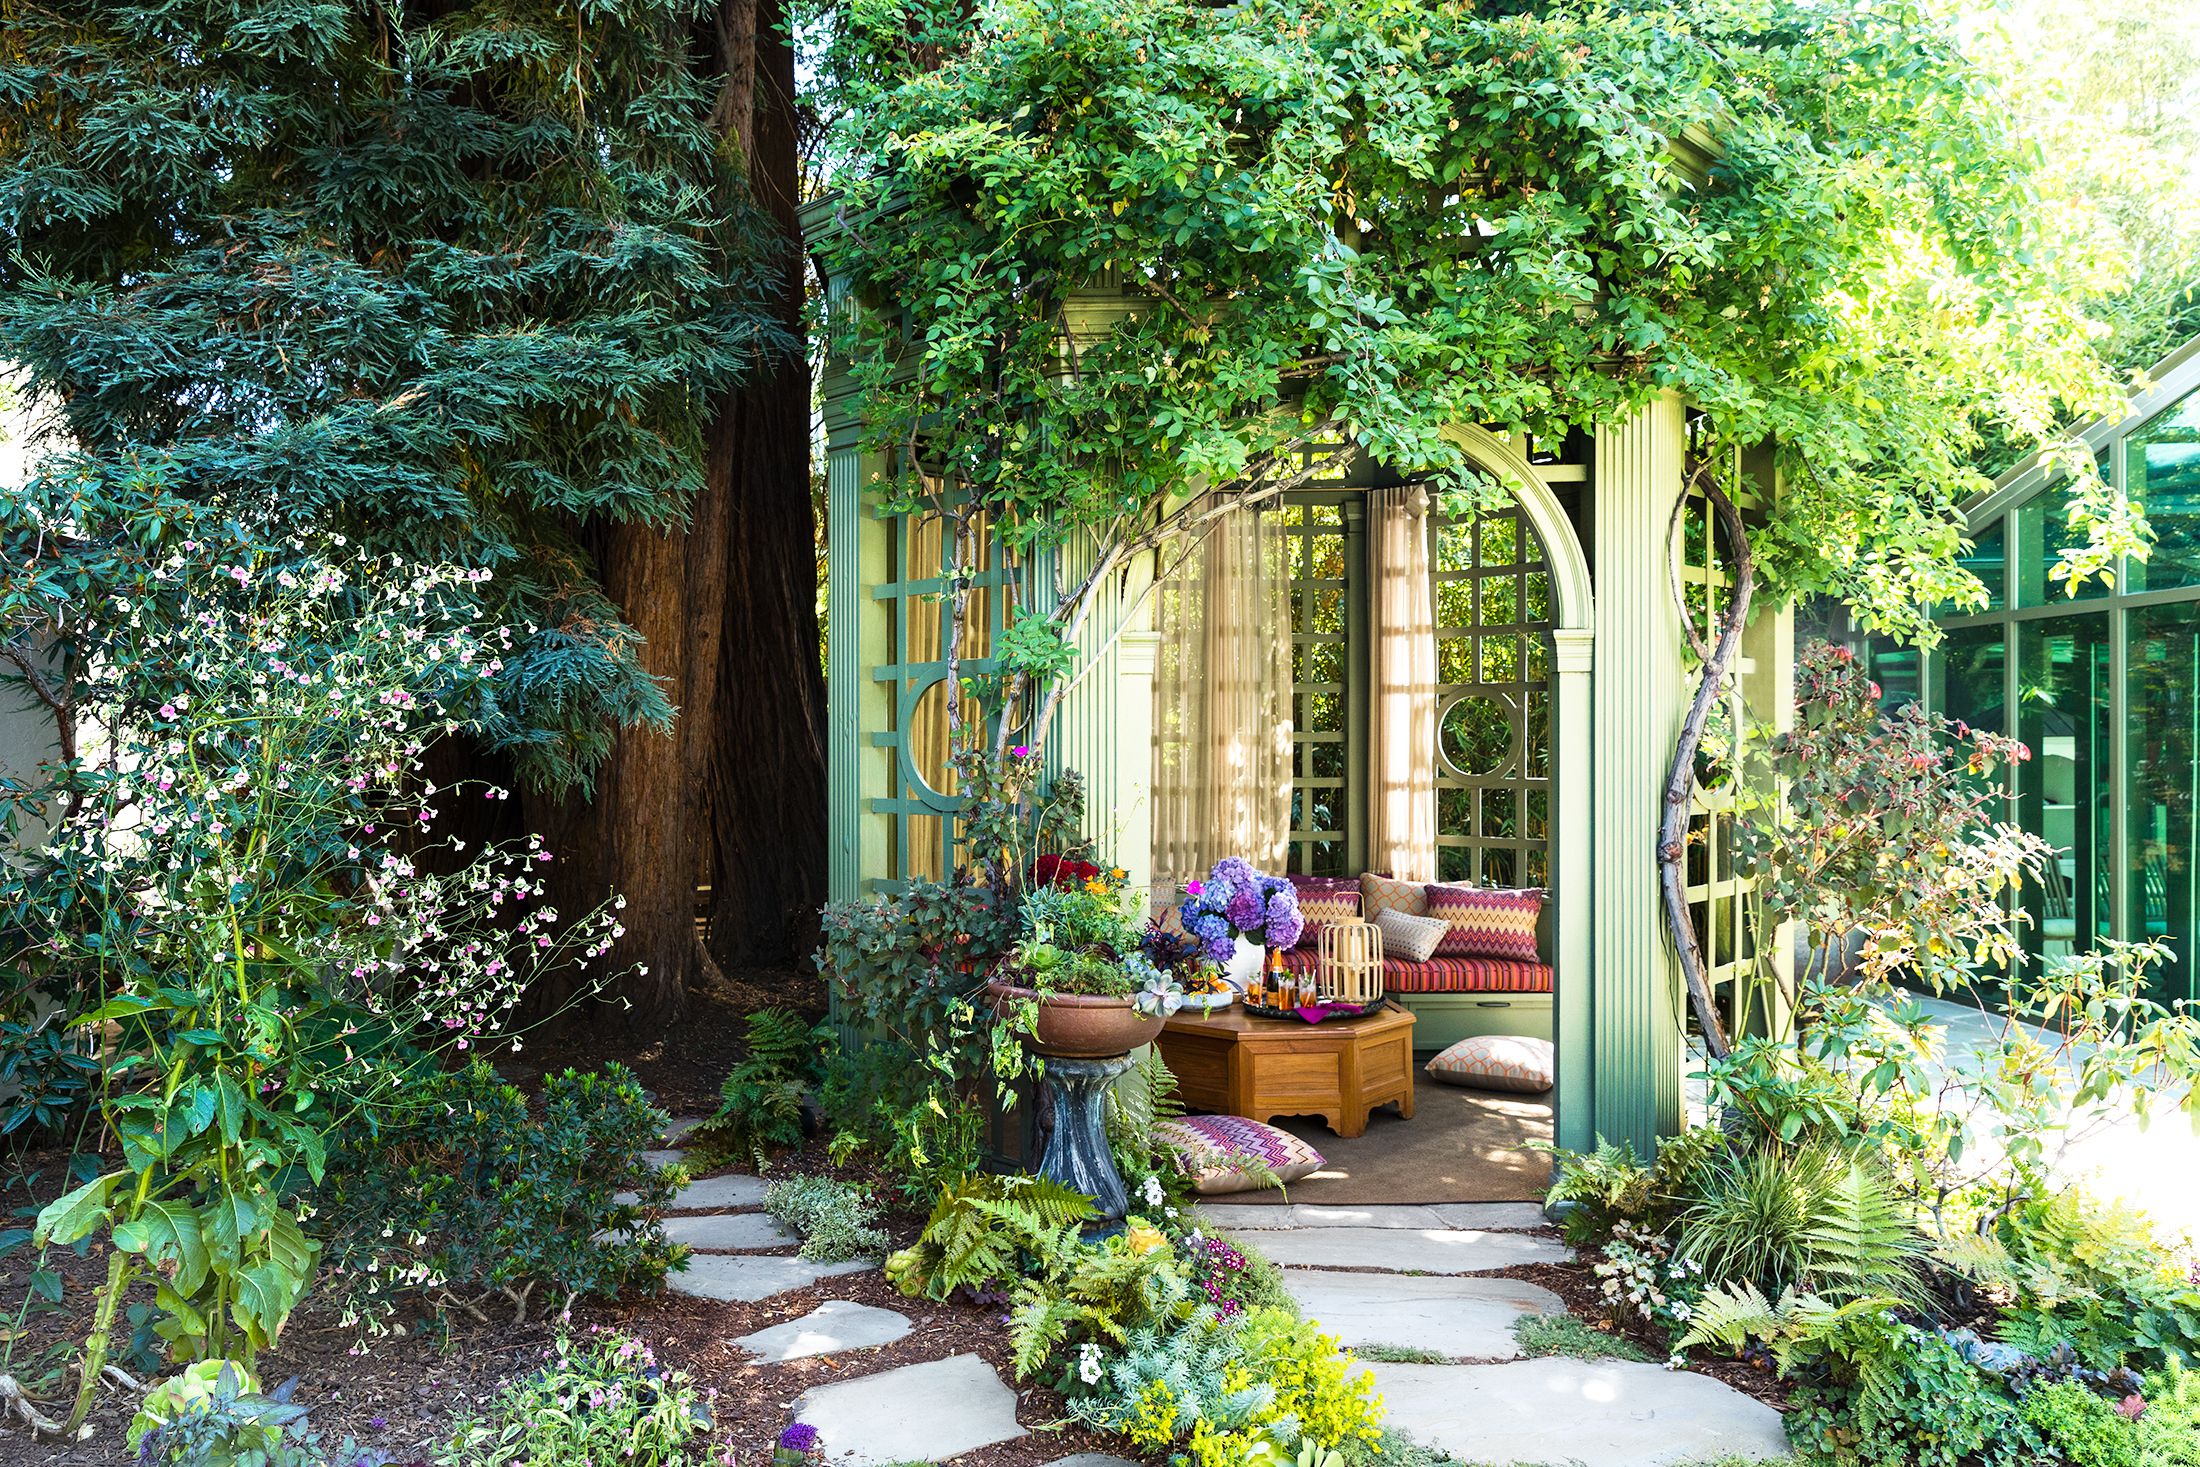 12 Backyard Design Ideas That Will Make You Rethink Your Outdoor Space